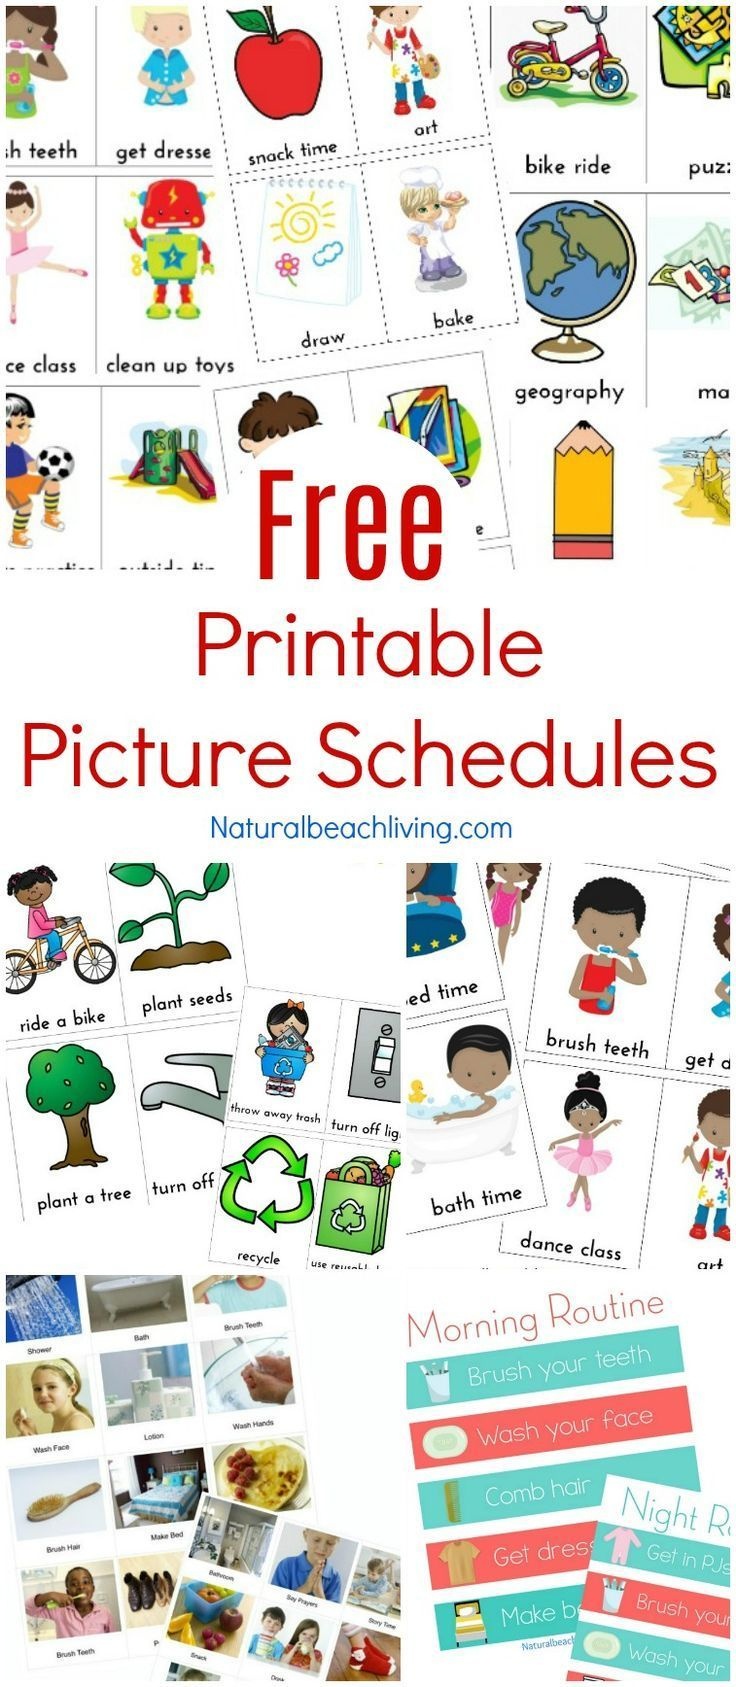 Free Printable Picture Schedule Cards - Visual Schedule Printables - Free Printable Schedule Cards For Preschool